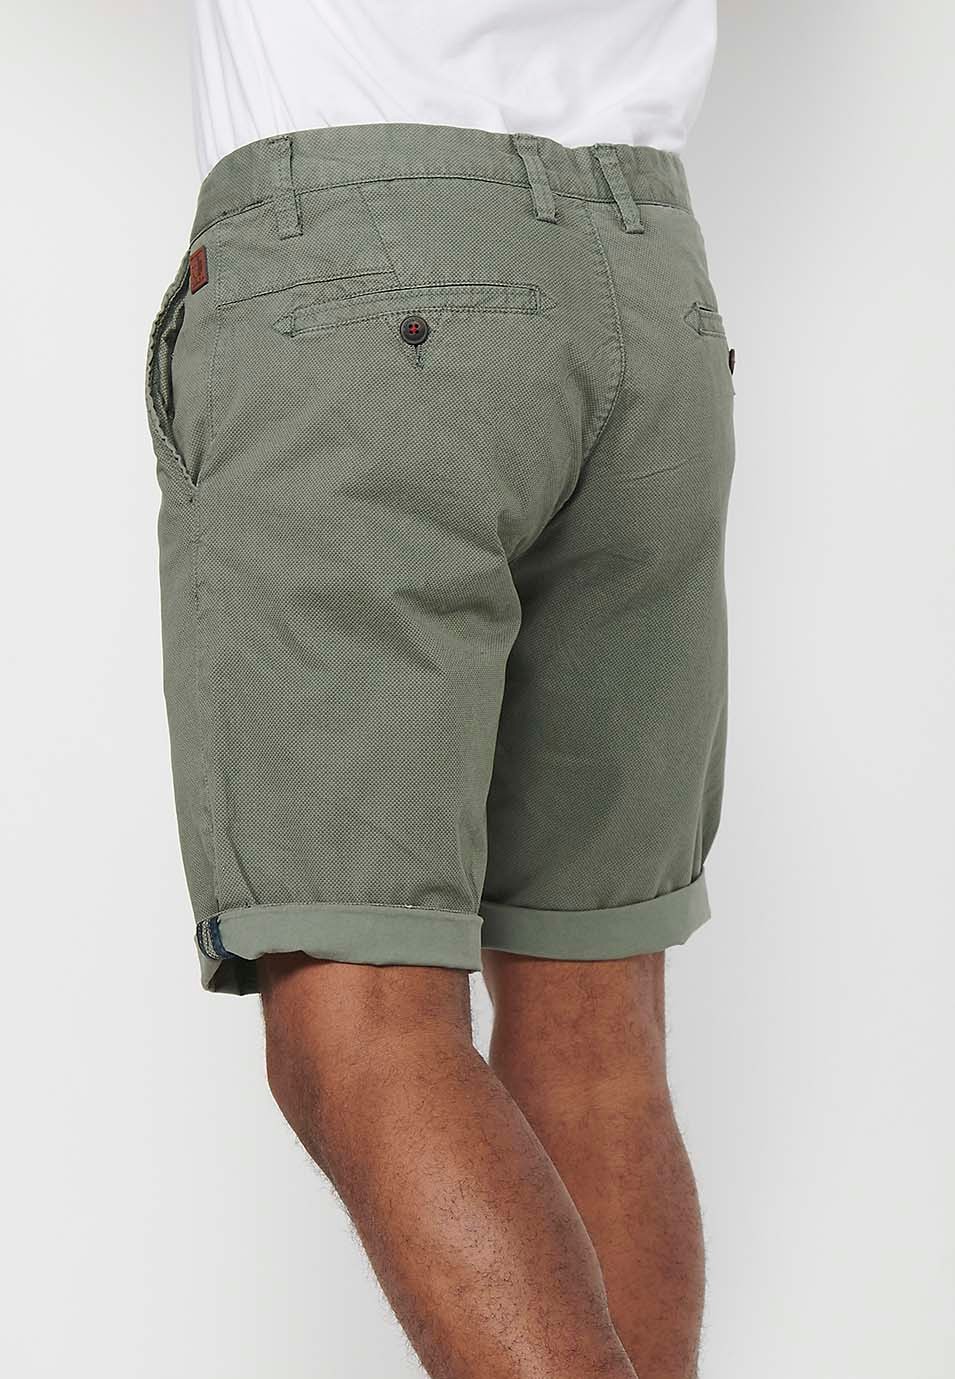 Bermuda Chino Shorts with Turn-Up Finish with Front Zipper and Button Closure with Four Pockets in Green Color for Men 7